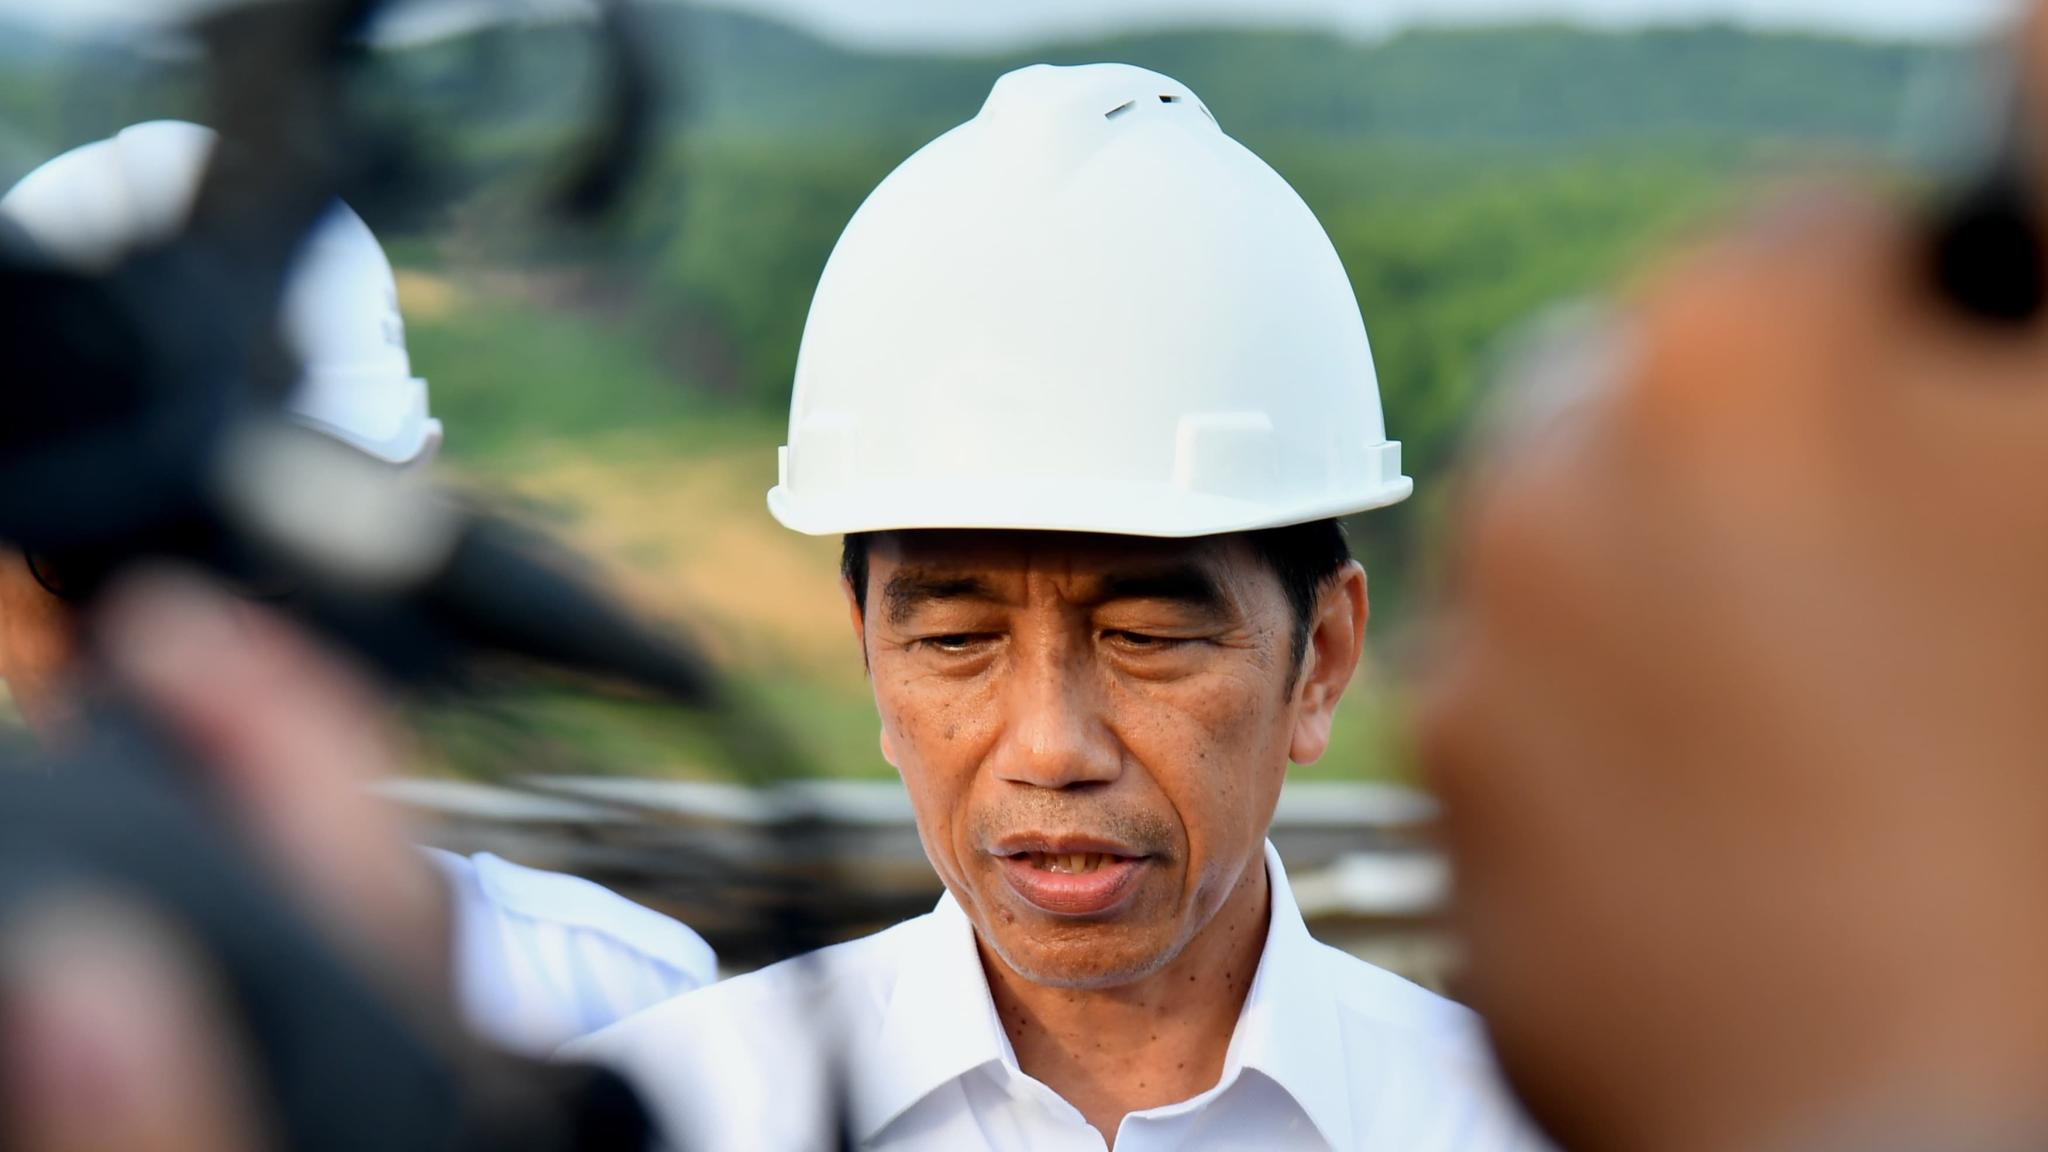 President Jokowi Affirms the Government’s Commitment to the Sustainability of IKN Development. BPMI Setpres/Rusman